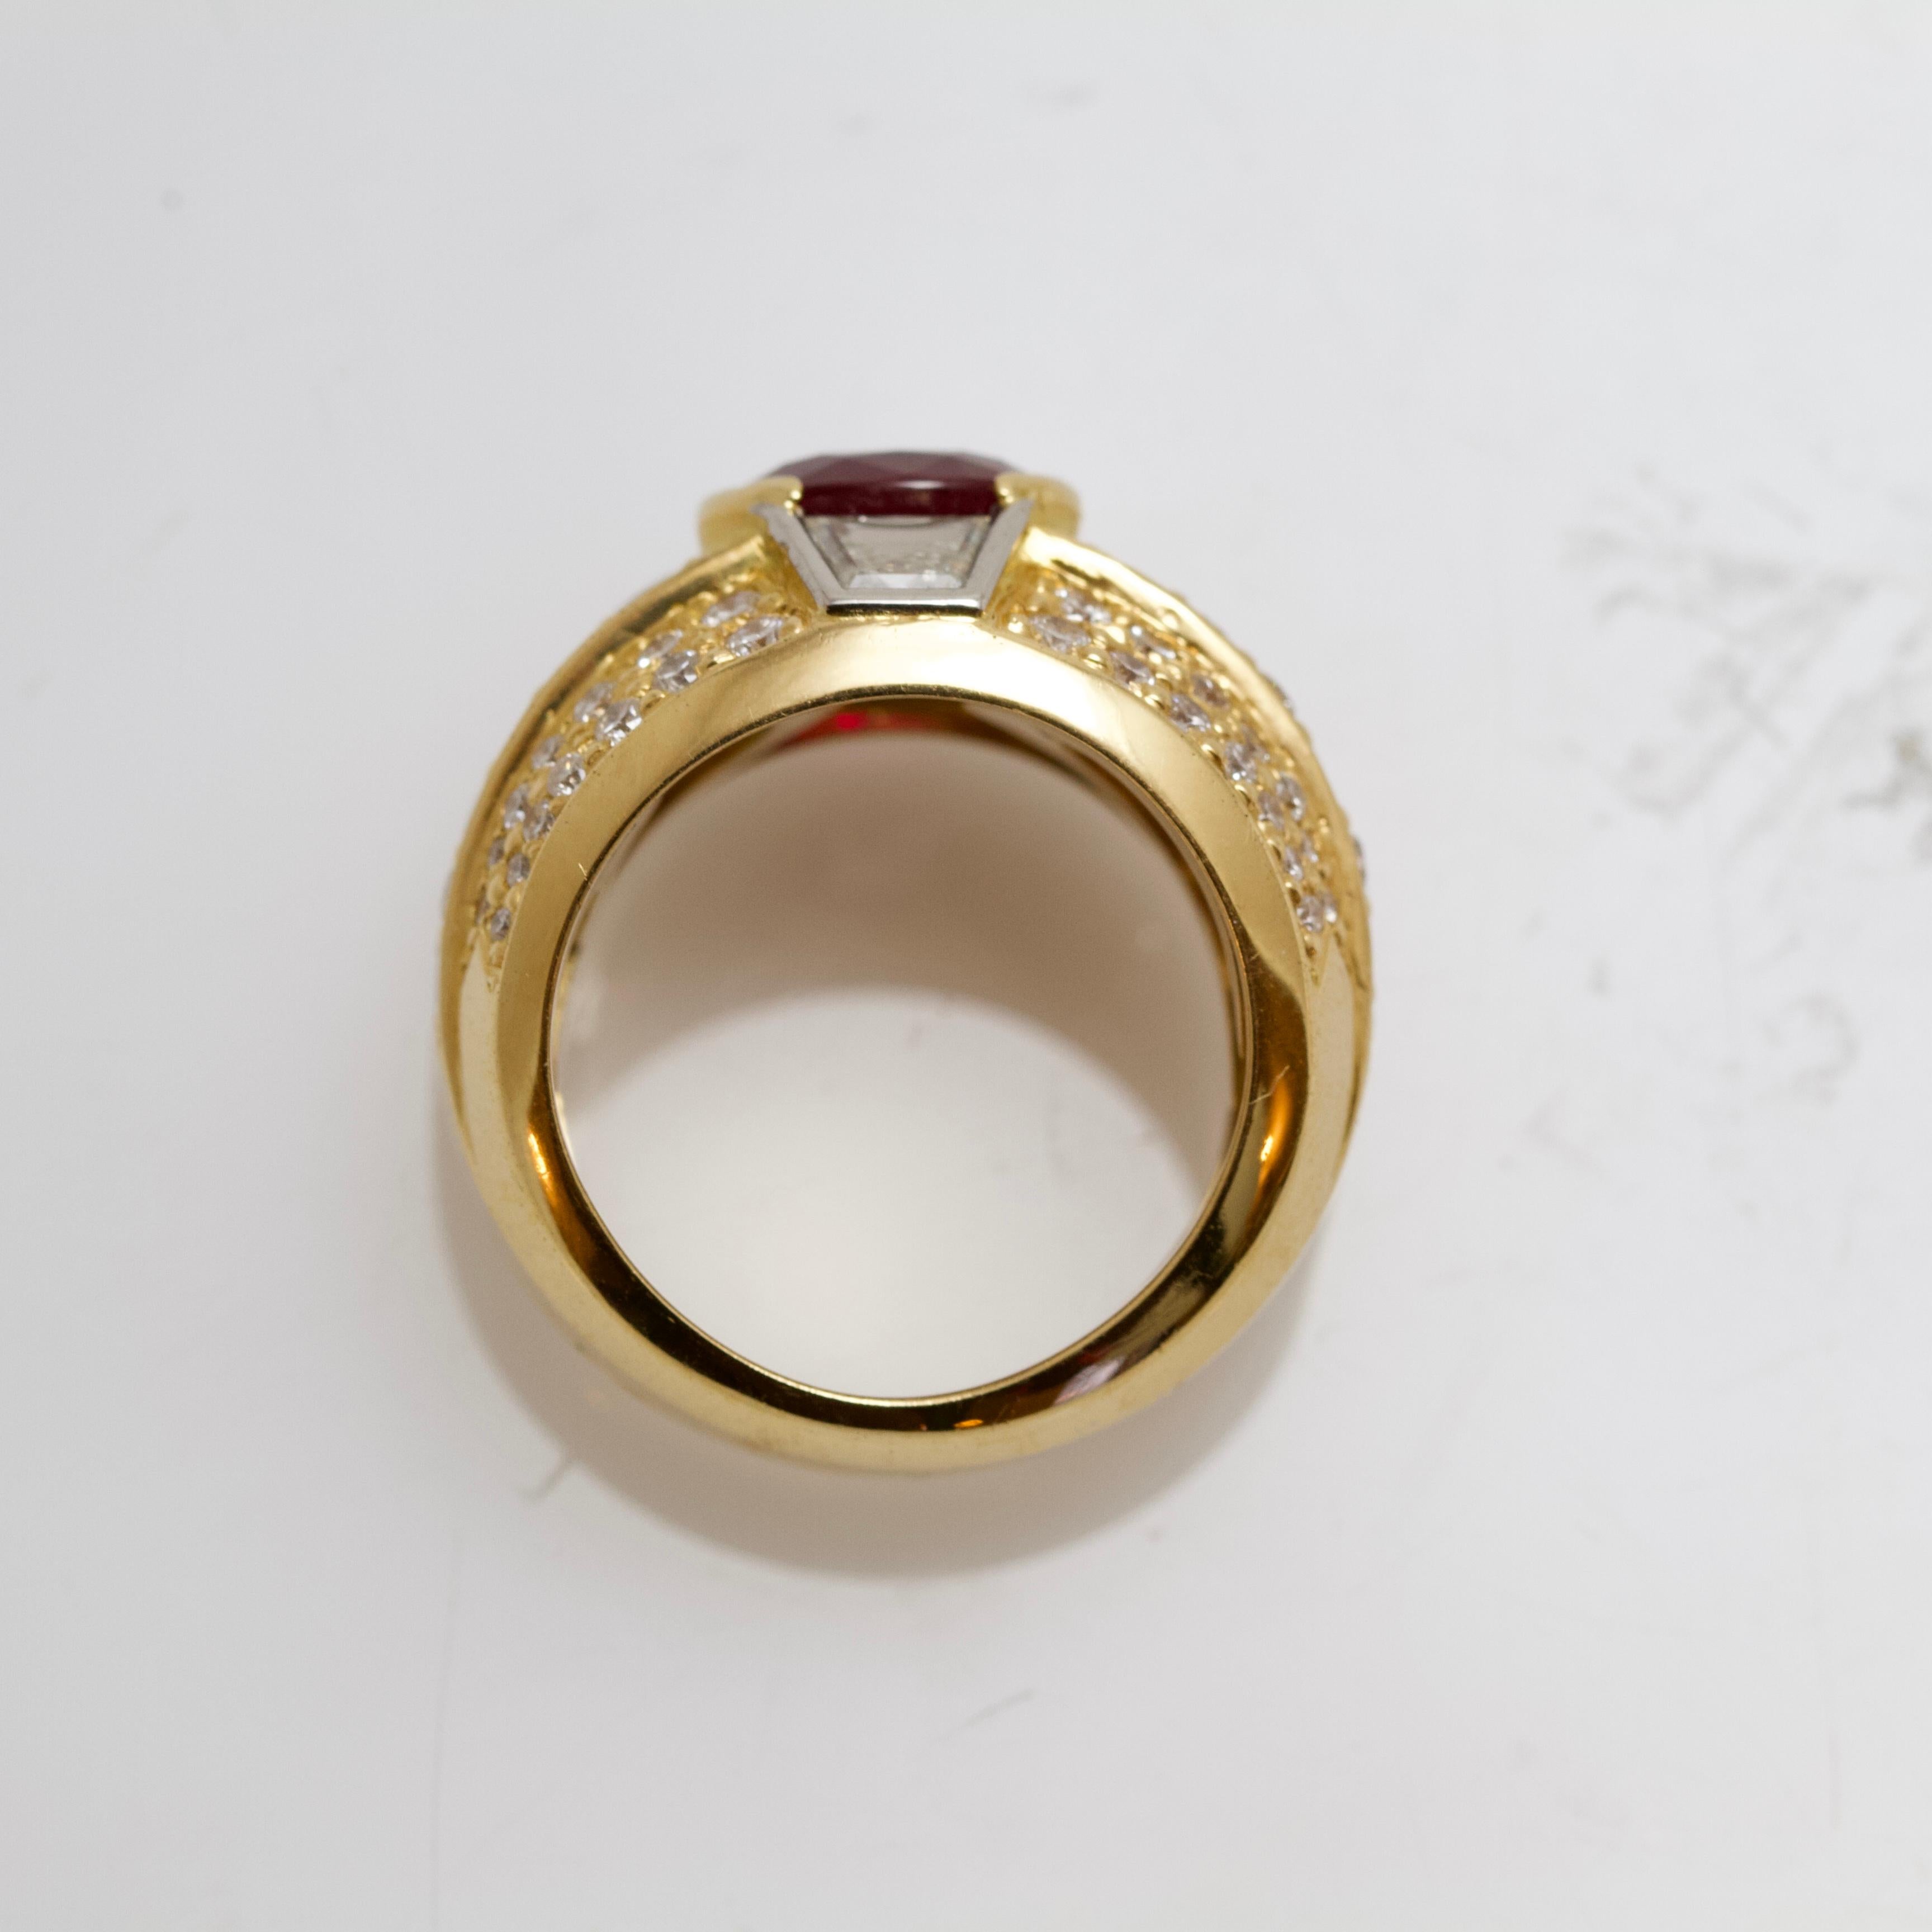 18kt yellow gold ring or signet ring set with rounds and baguette cut diamants and centered with a rubis weighting around 2 carats.
Made probably around 1990. 
Ruby's quality natural and nice red color.
French assays marks for 18kt gold. 
French